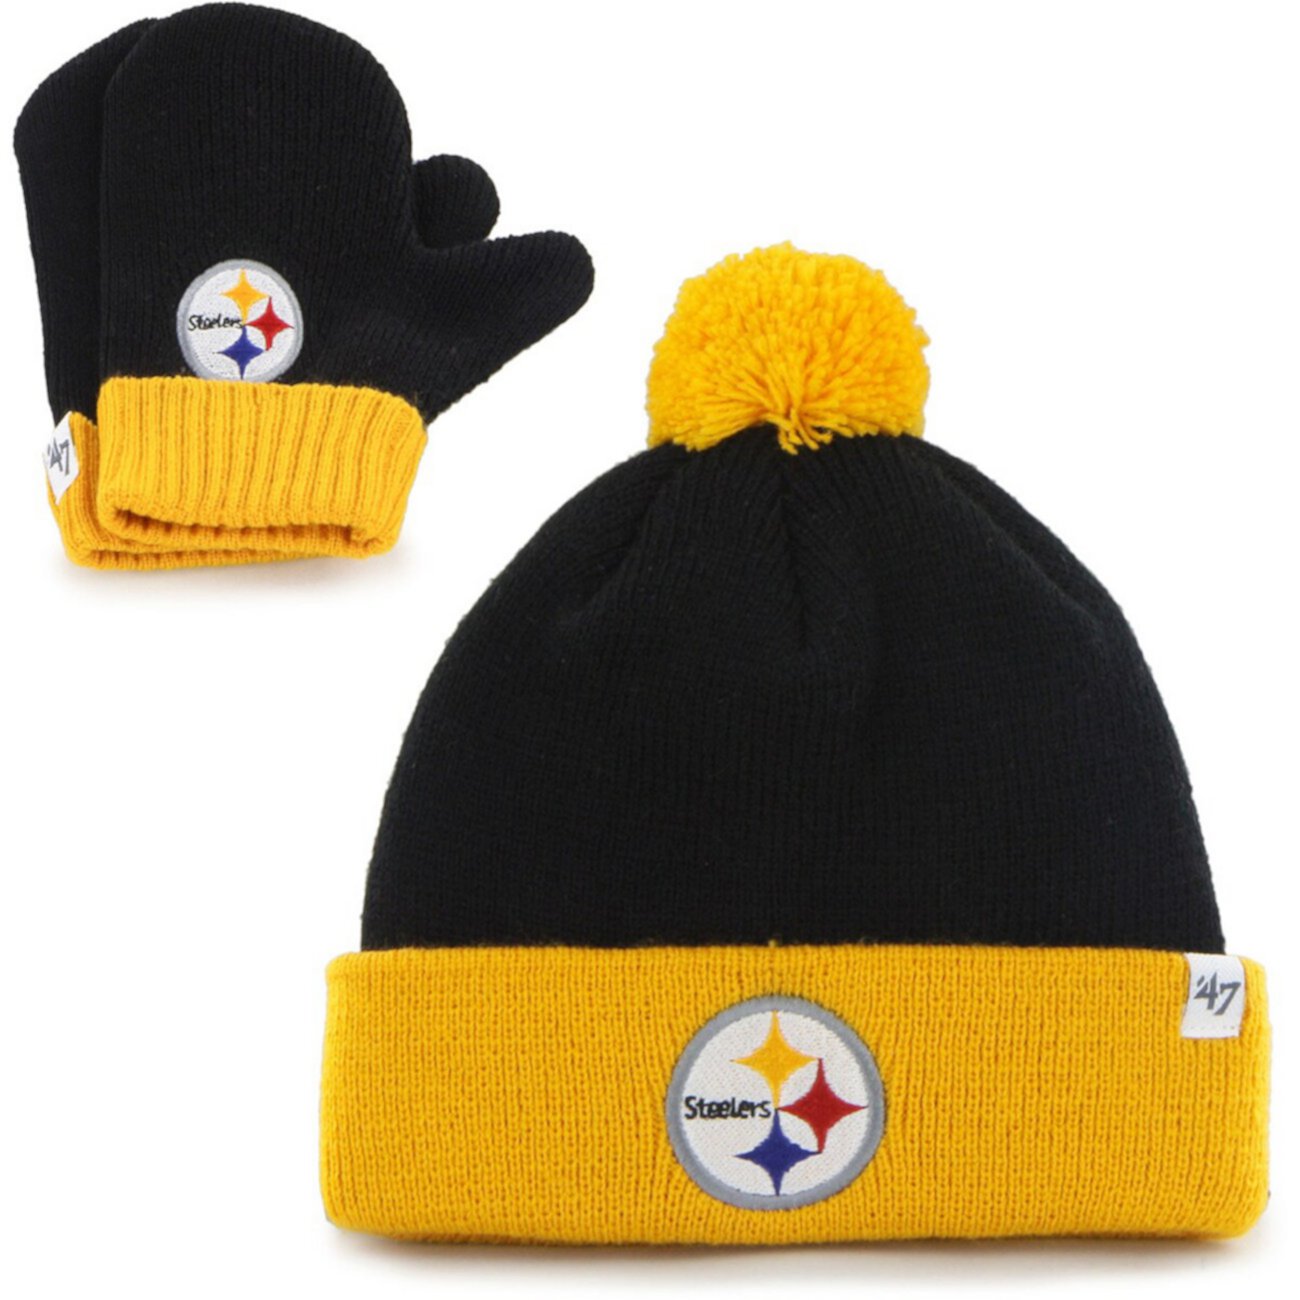 Infant Pittsburgh Steelers Bam Bam Cuffed Knit Hat & Mittens Set '47 Brand